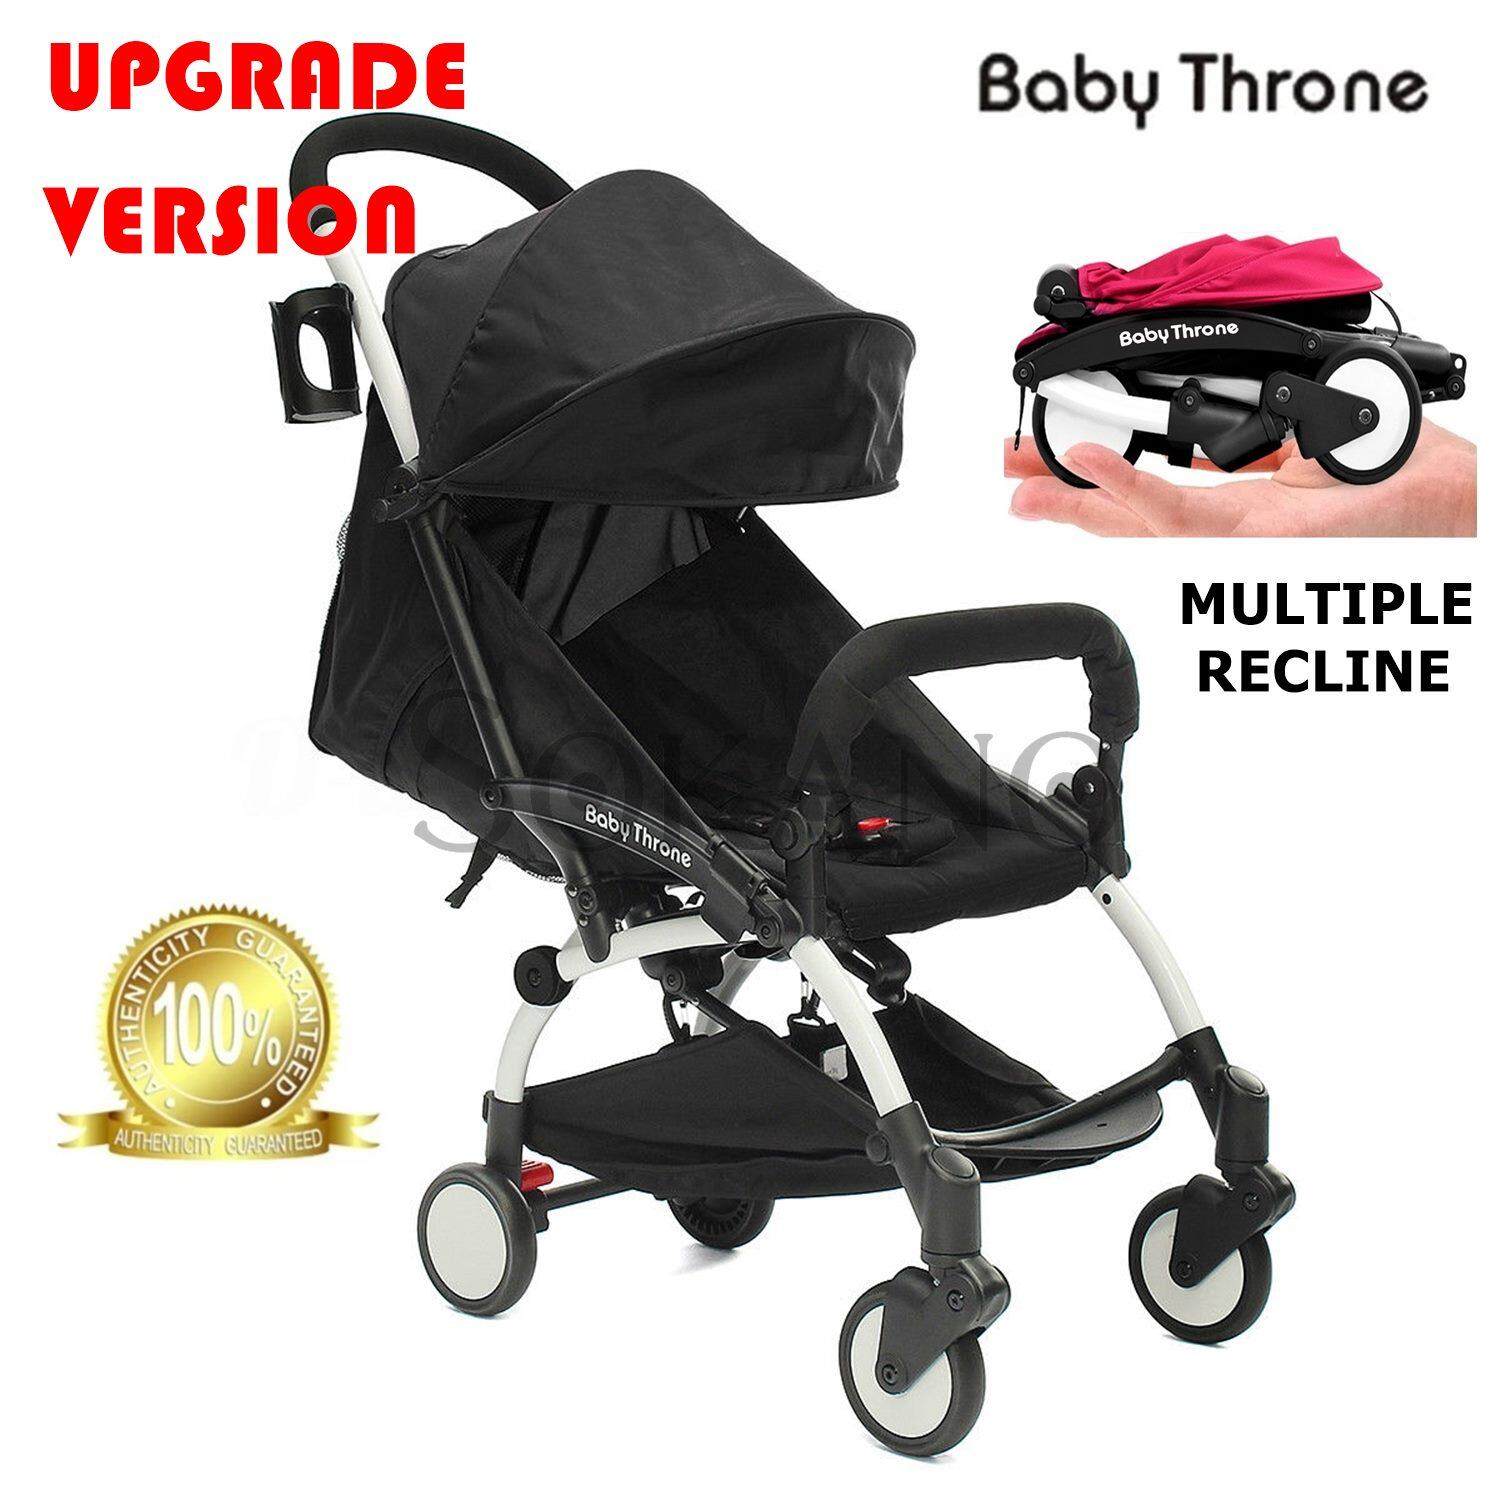 Baby Throne Strollers price in Malaysia 